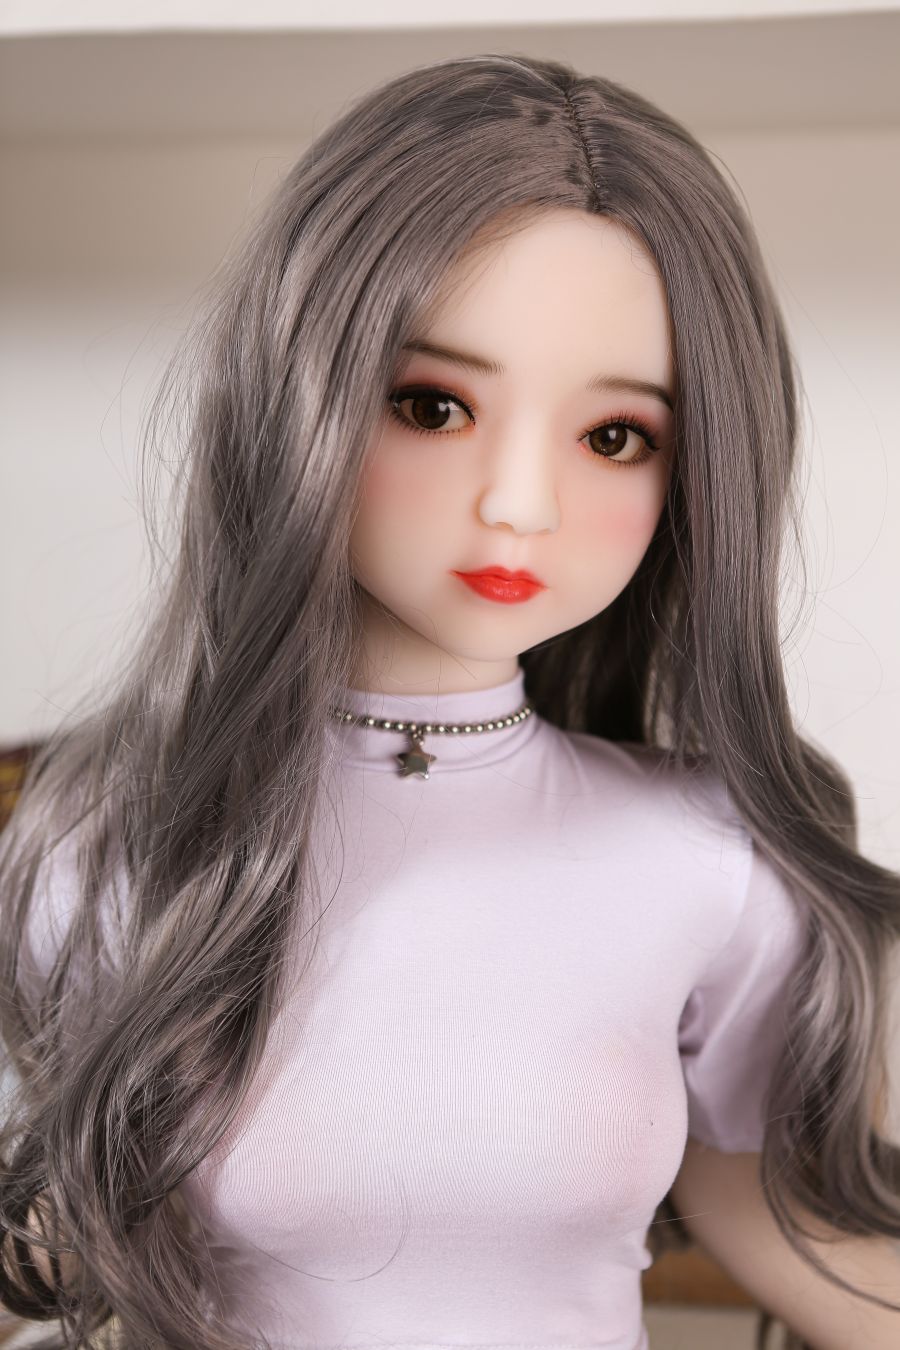 68cm real doll5